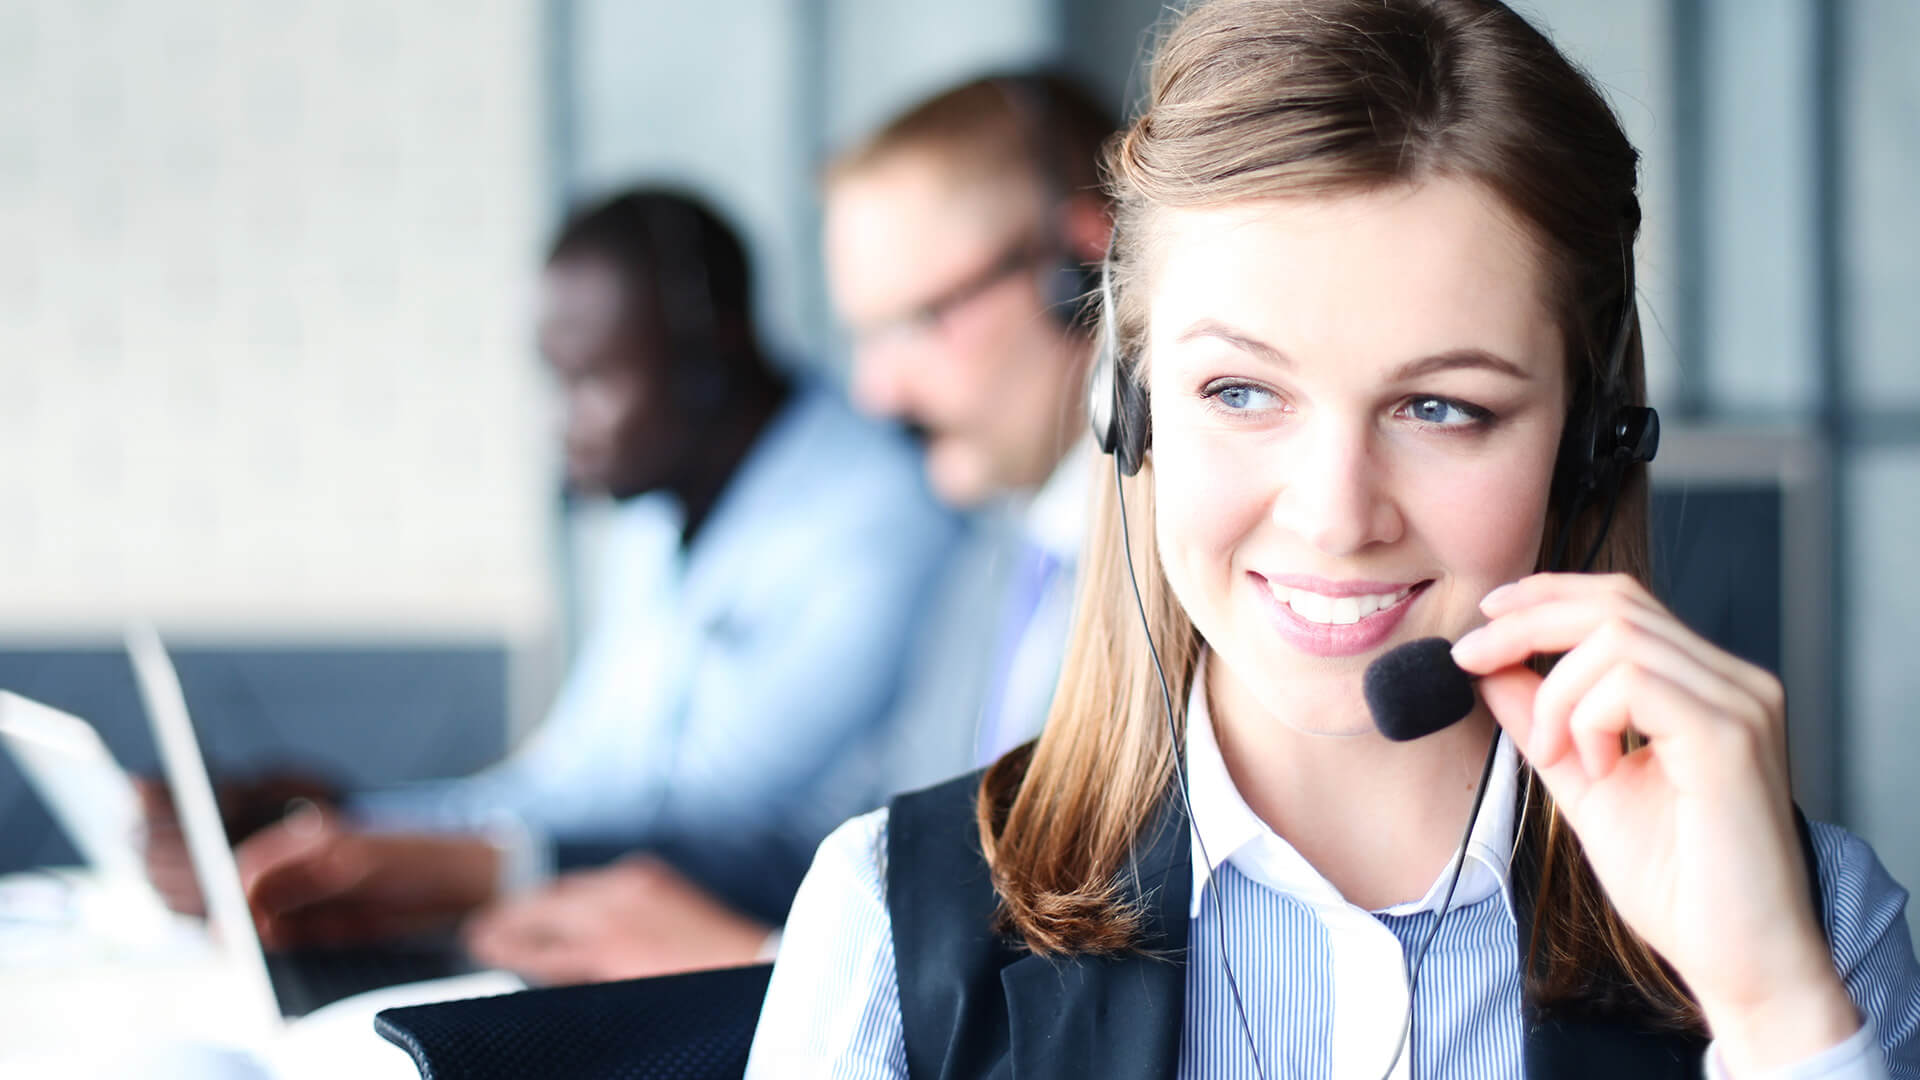 Client Service - Or Customer Care? Knowing the Difference Can Mean More Profit